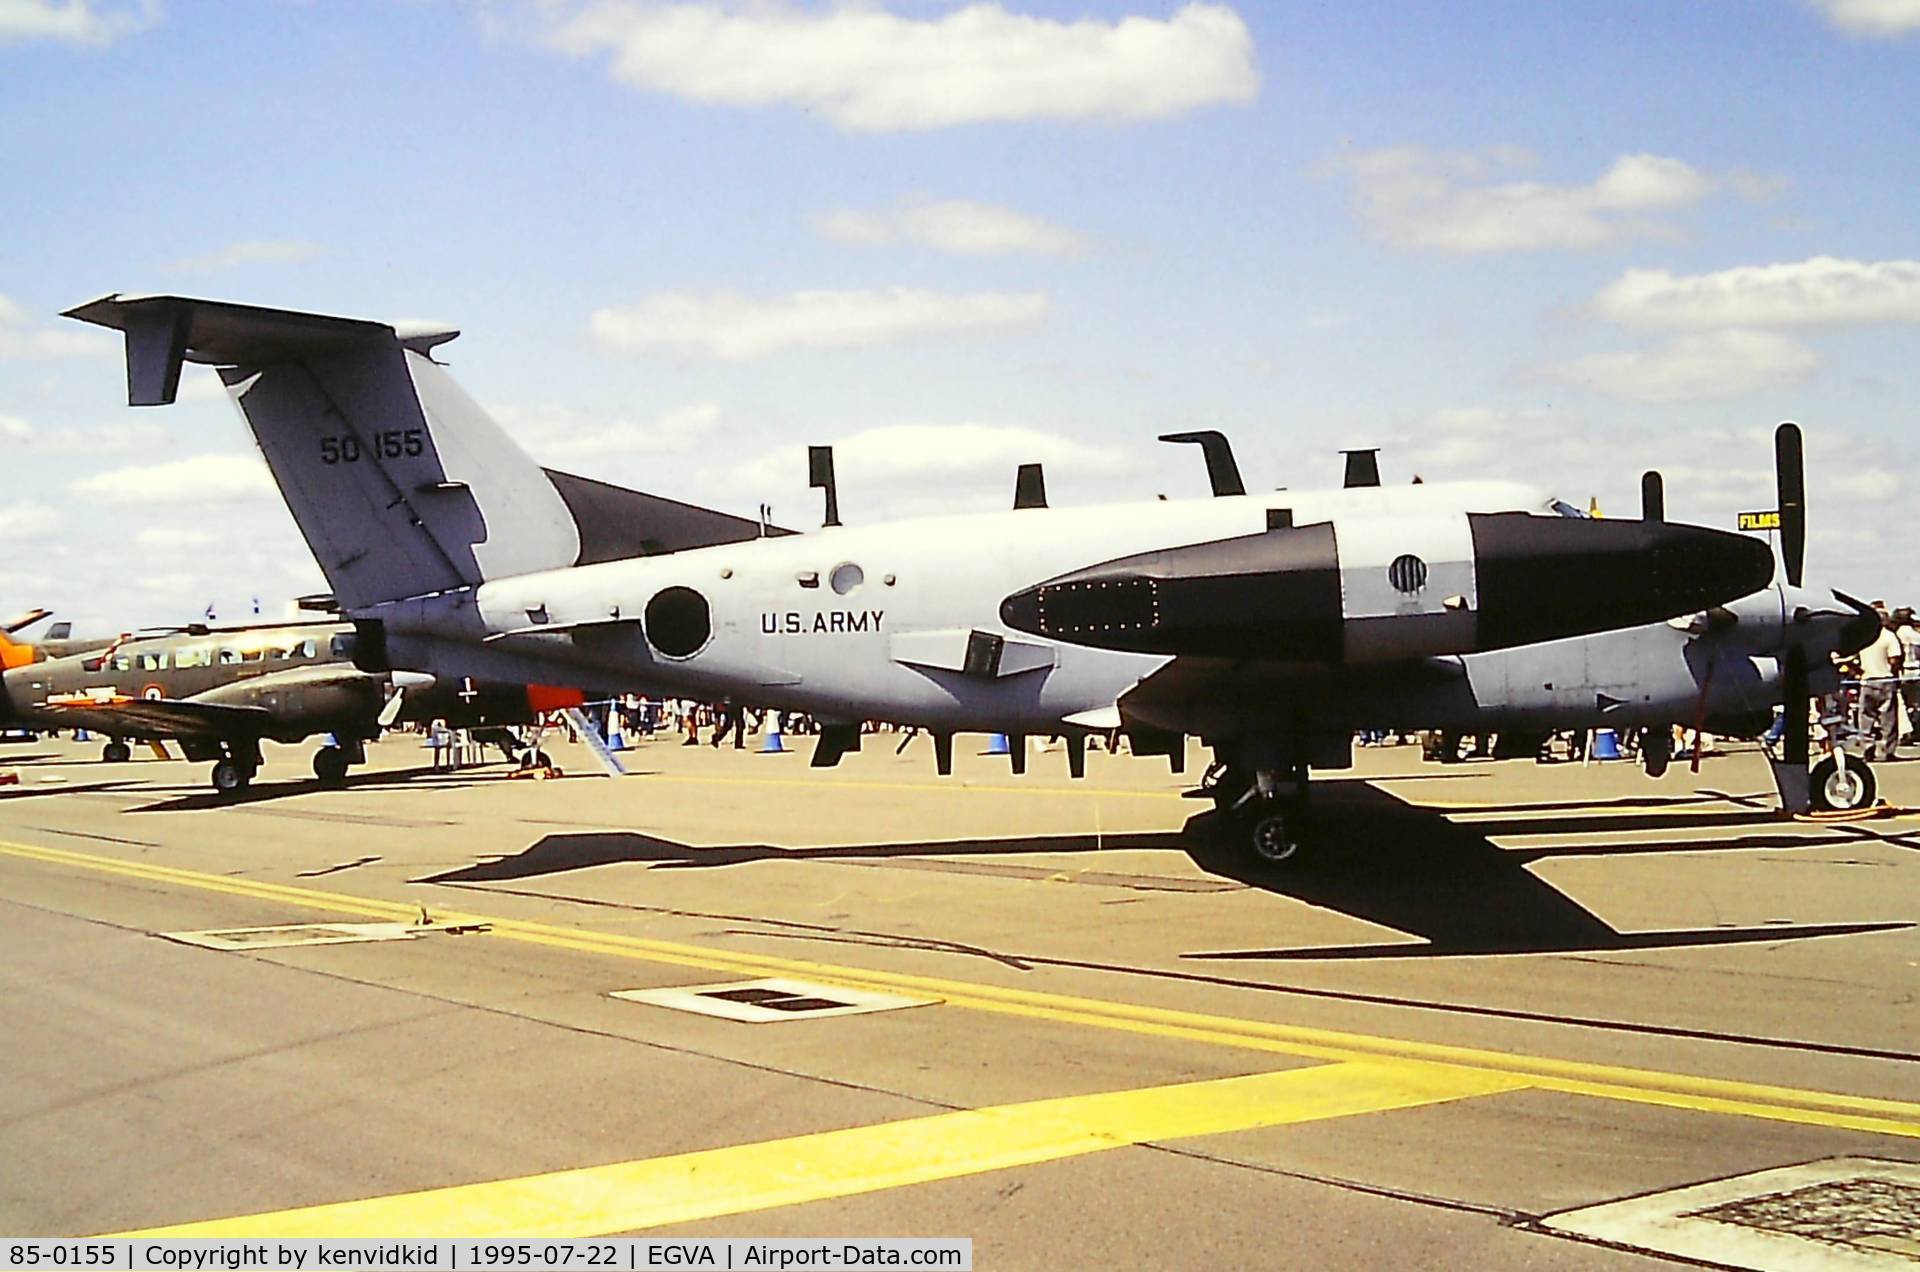 85-0155, 1985 Beech RC-12K Huron C/N FE-009, At the 1995 Fairford International Air Tattoo, scanned from slide.